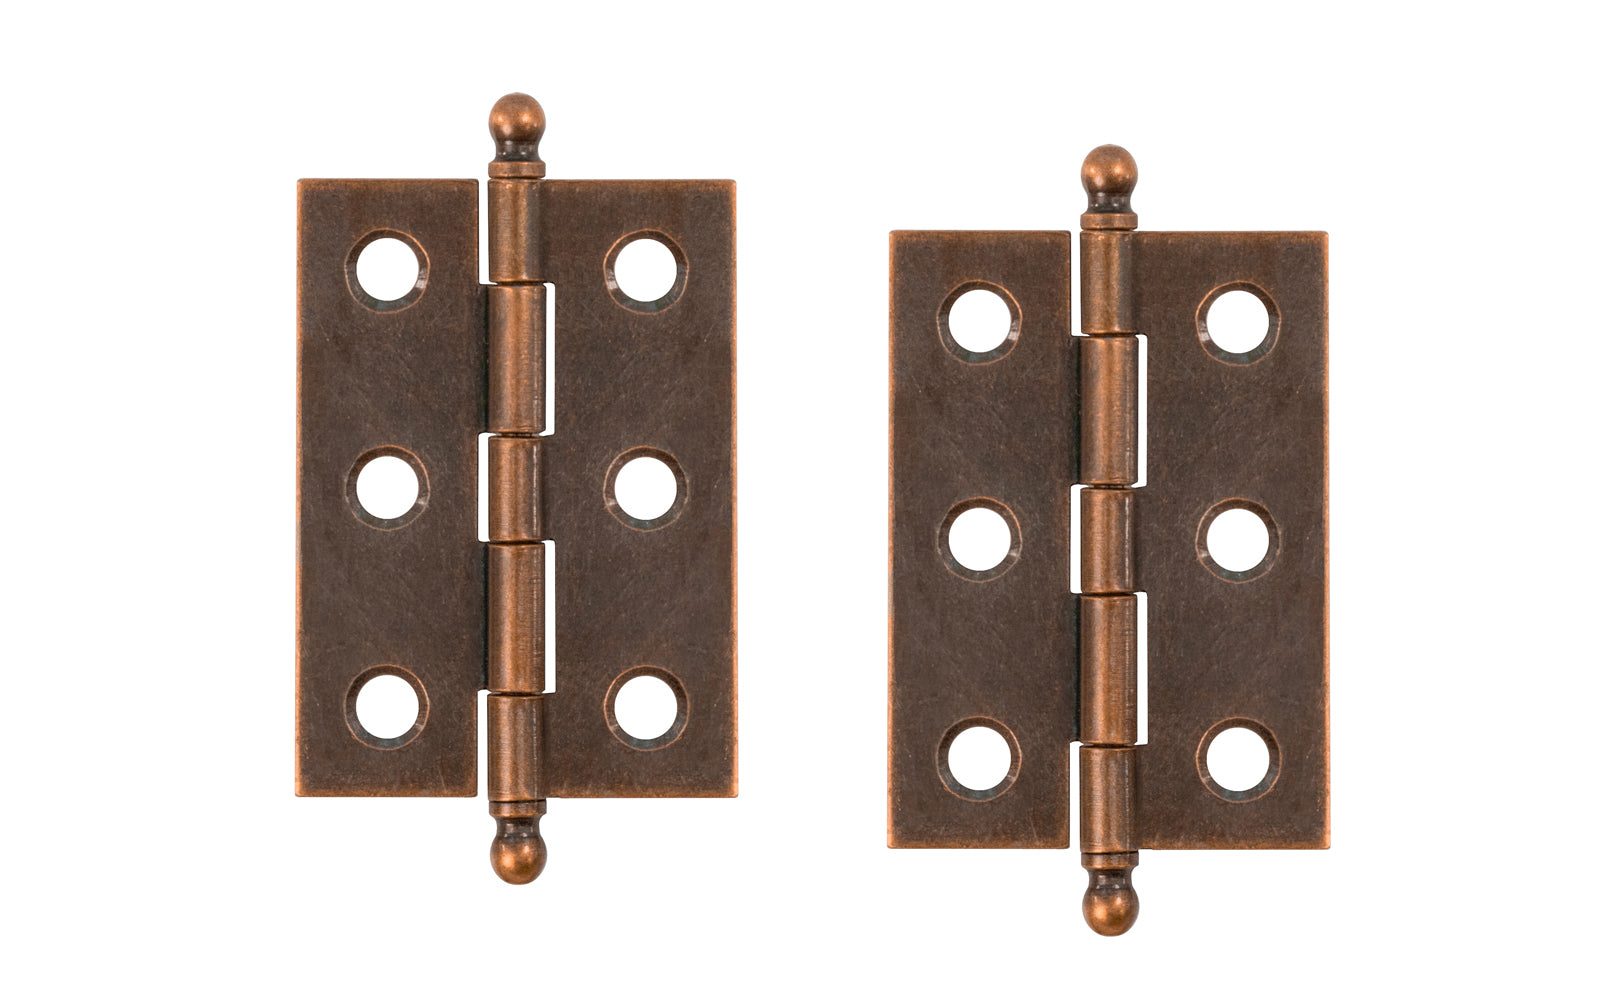 Traditional & classic ball-tip steel cabinet hinges with loose pins. Removable hinge pins which makes for easy installation when working with cabinets. 2" high x 1-3/8" wide. Sold as a pair of hinges. Antique Copper Finish.